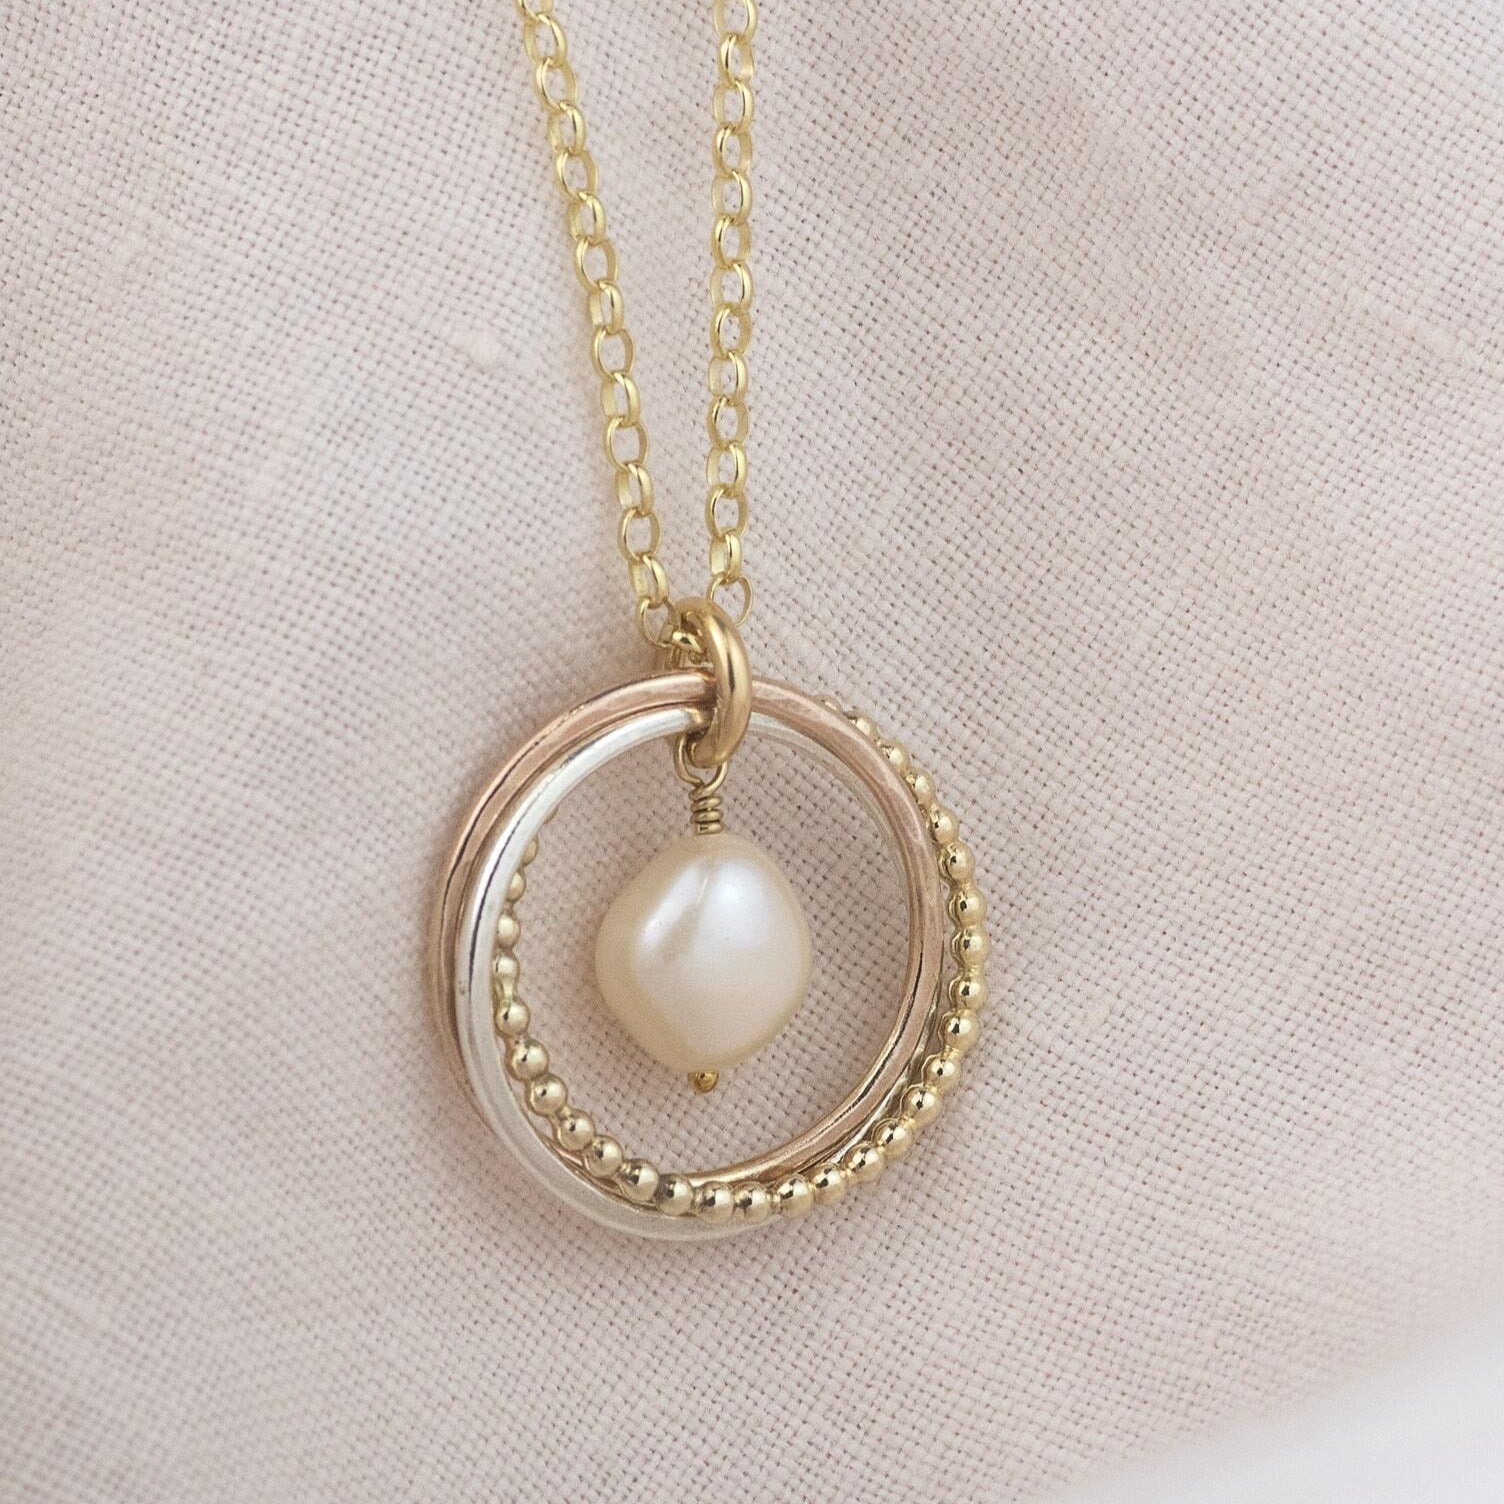 30th Wedding Anniversary Gift - 9kt Gold Pearl Wedding Anniversary Necklace